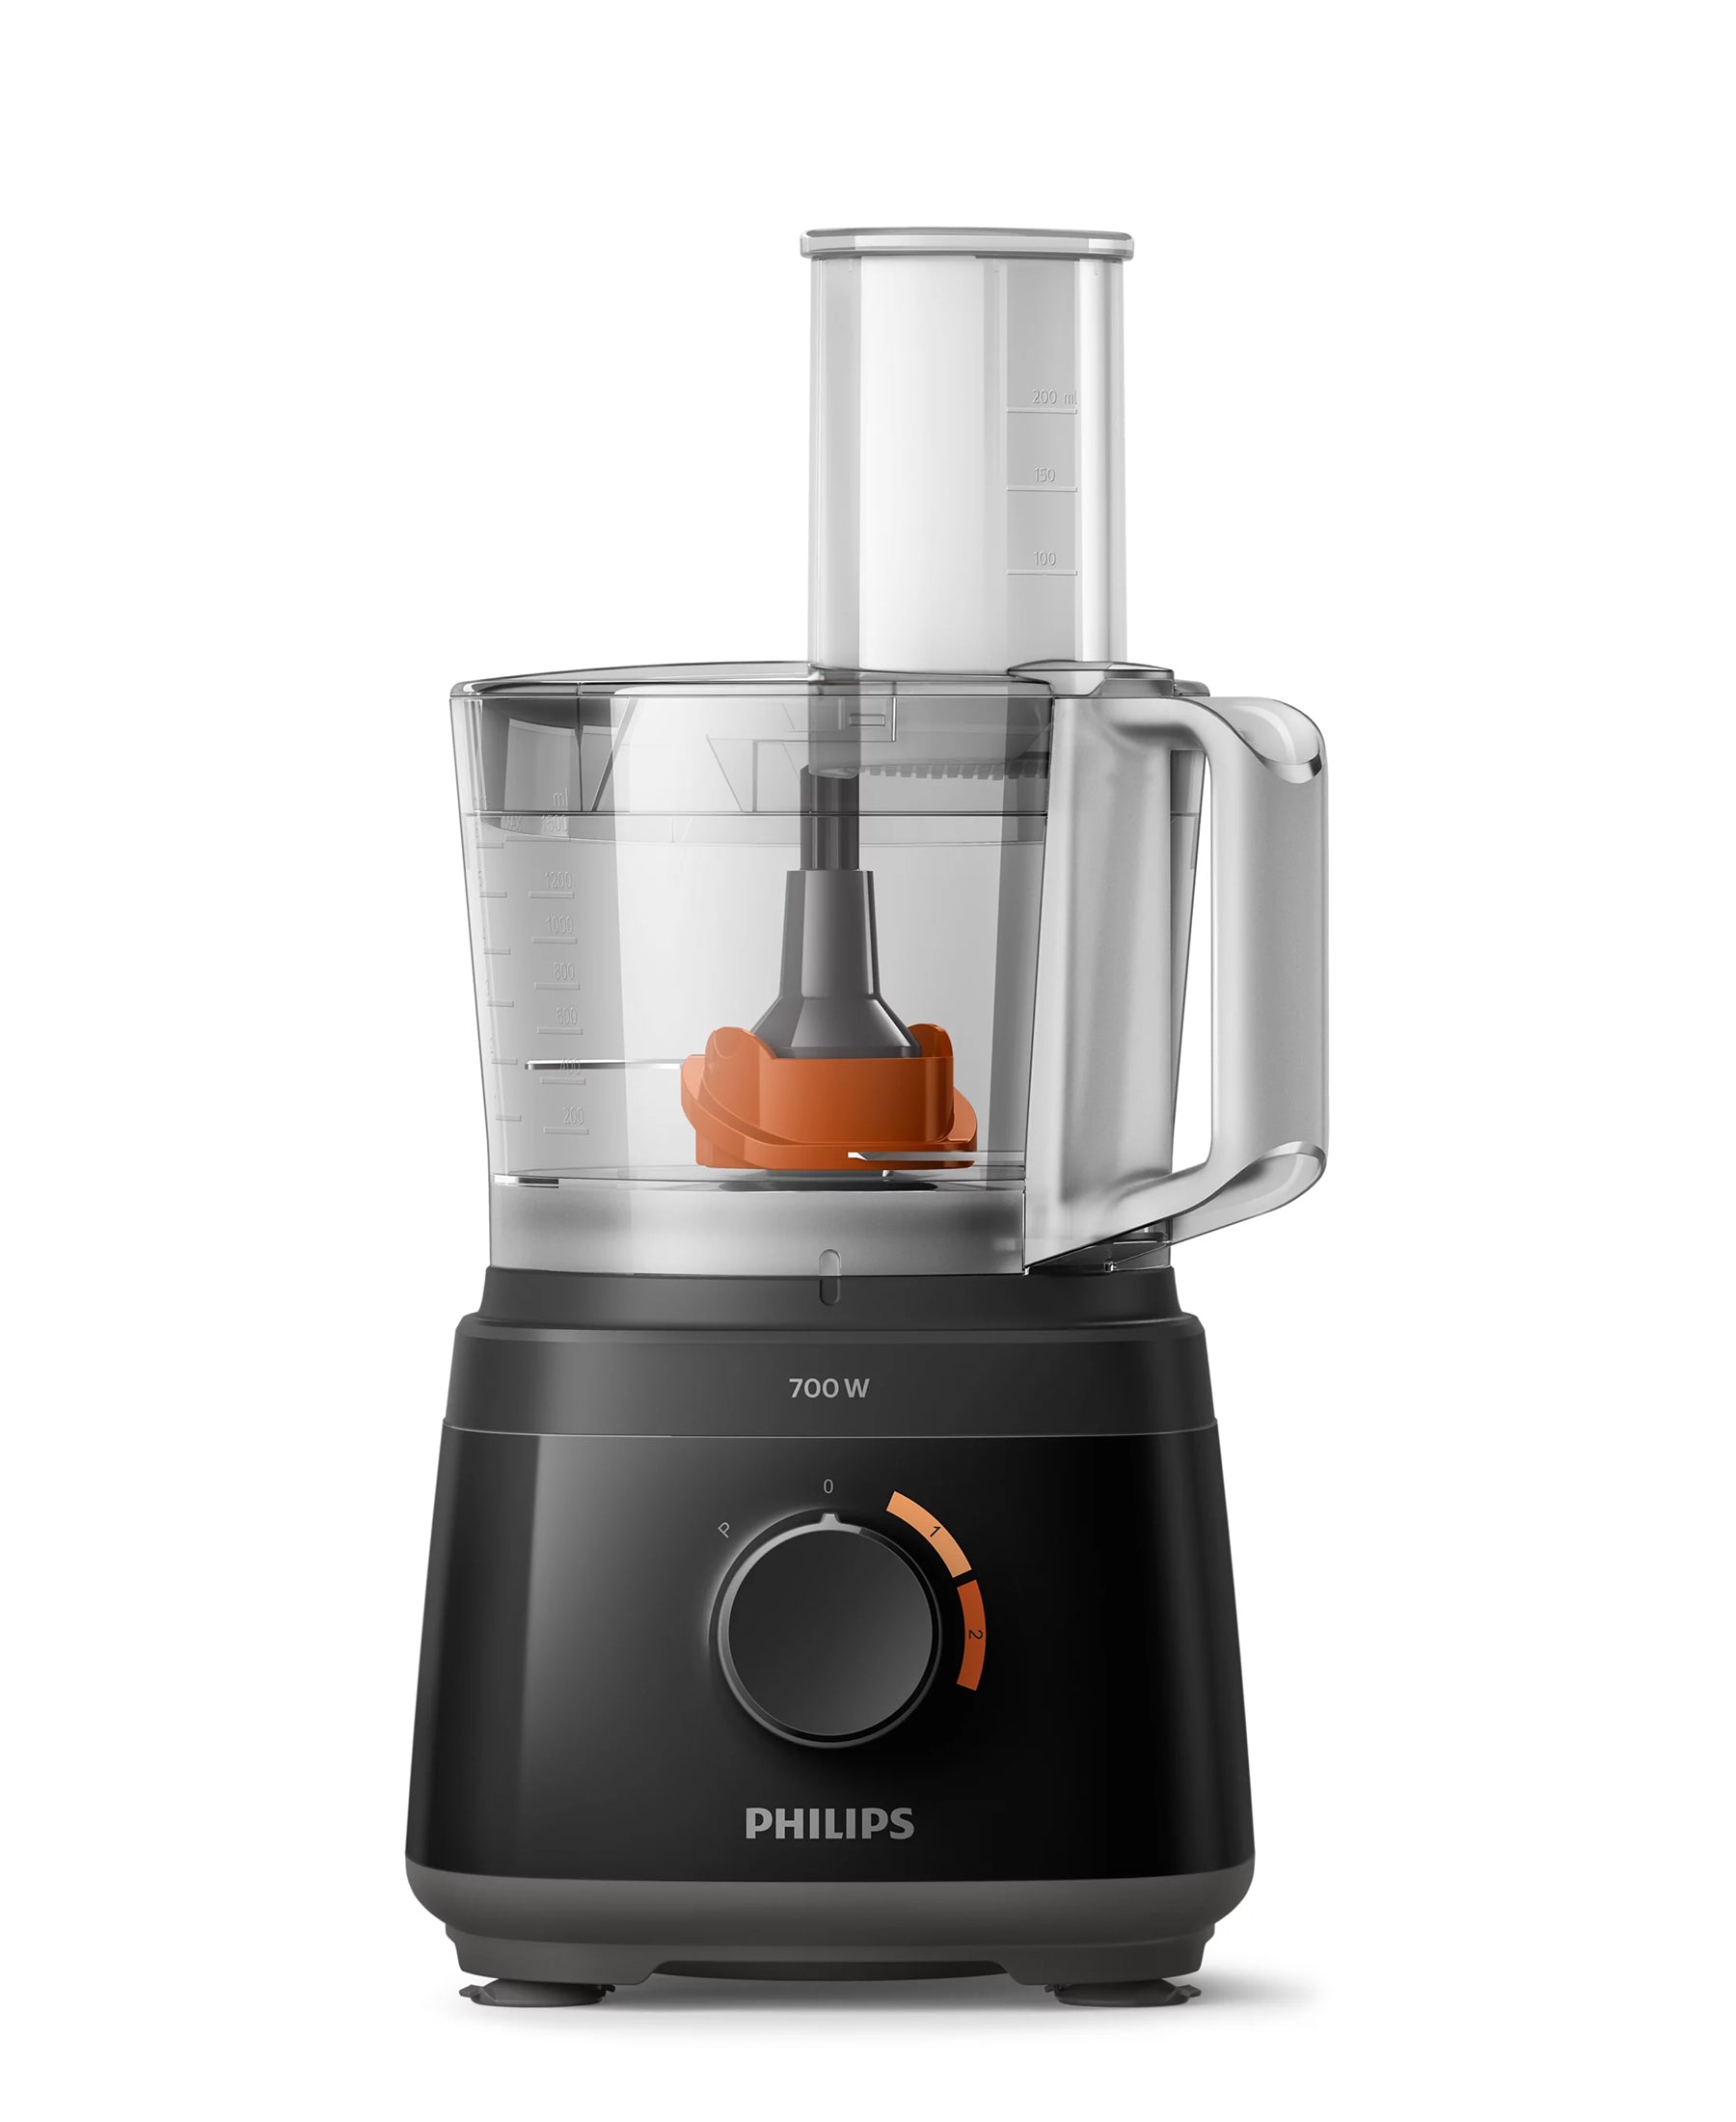 Philips Daily Collection Food Processor - Black